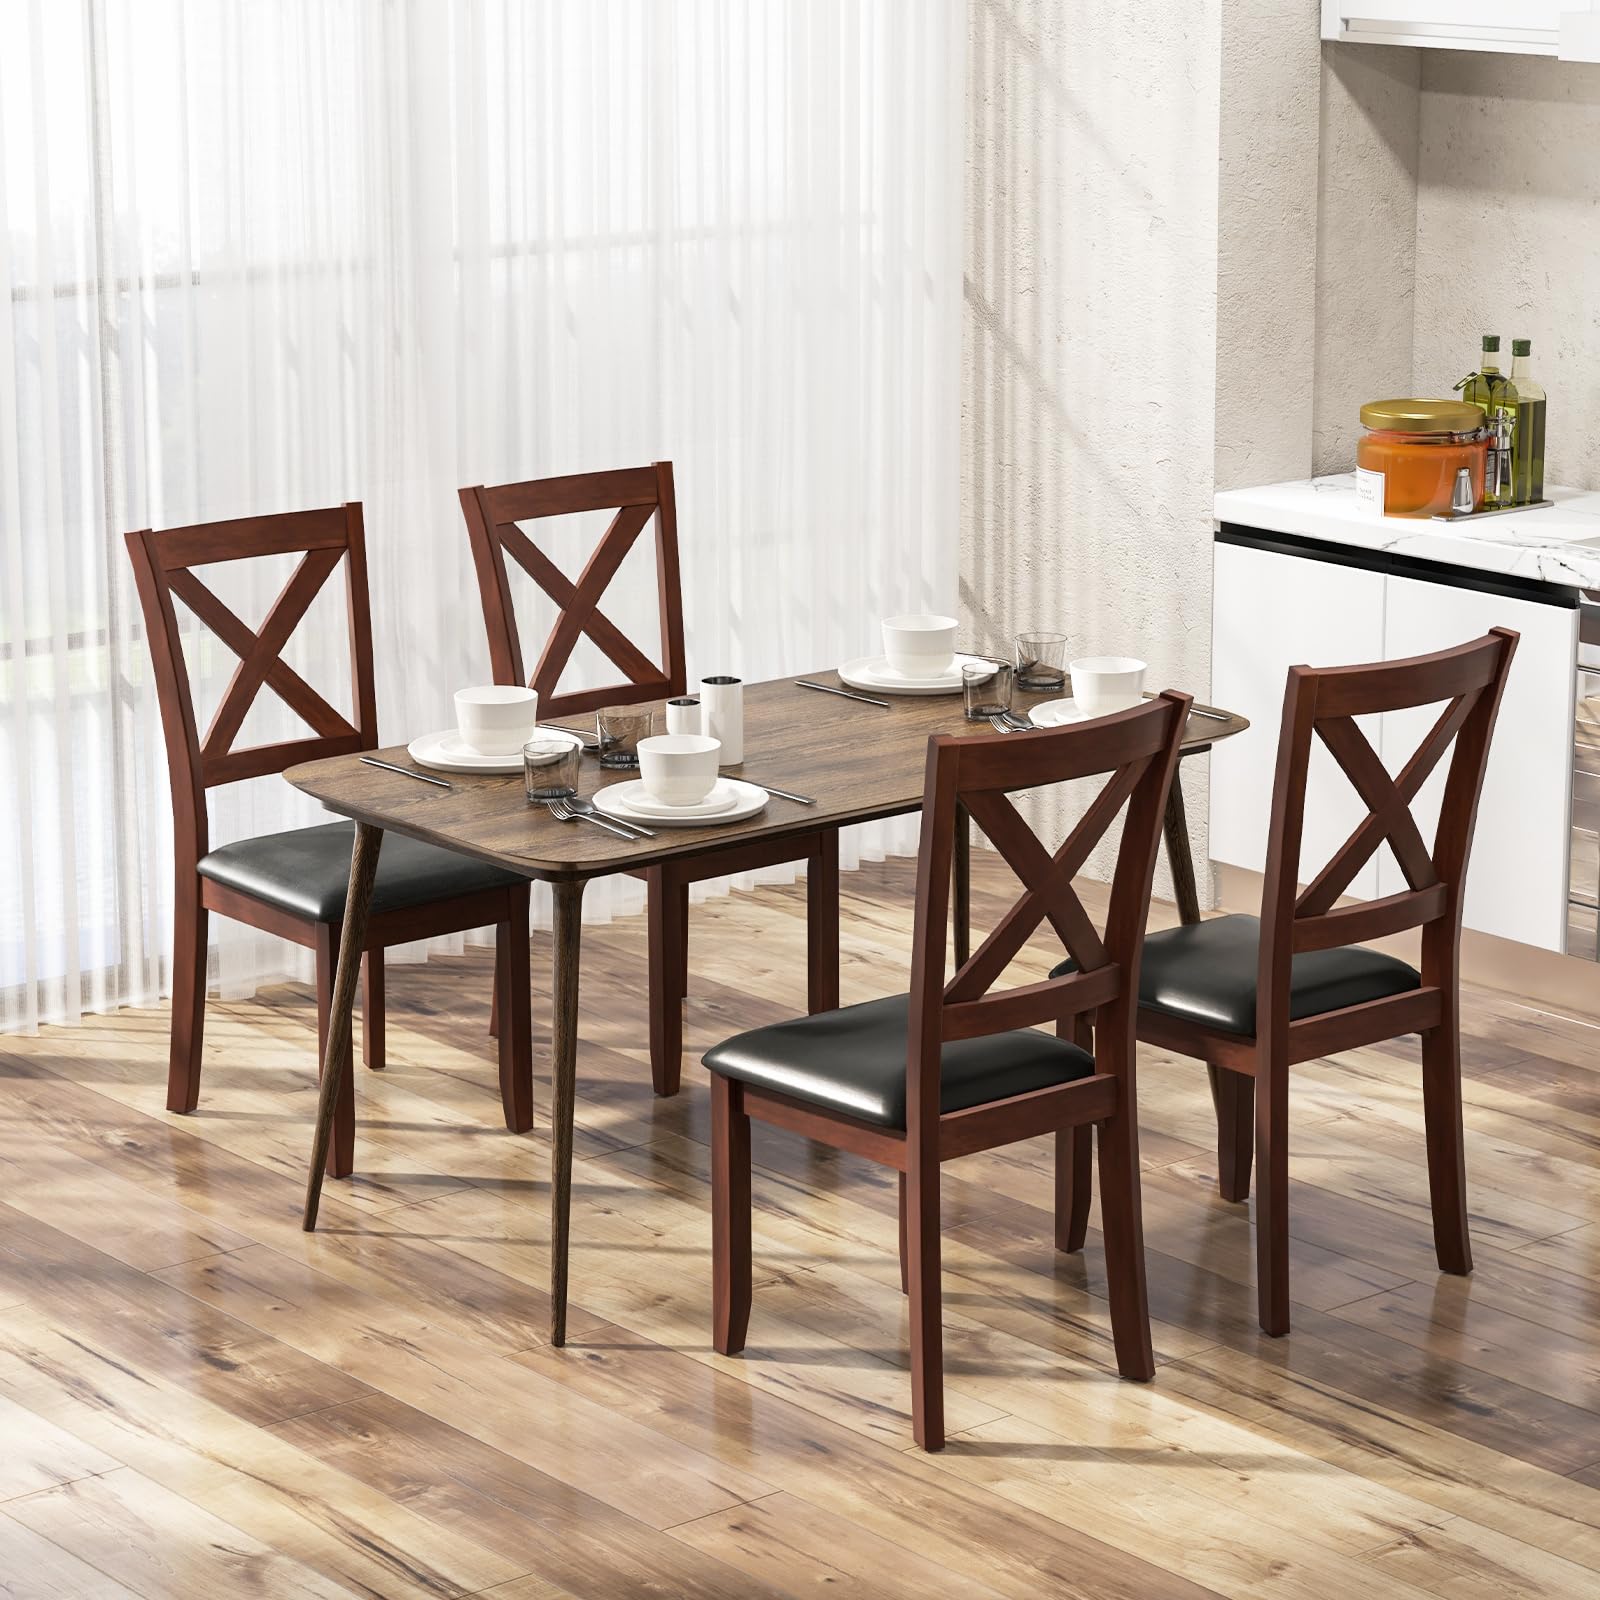 Giantex Wood Dining Chairs, Faux Leather Upholstered Dining Chairs with Rubber Wood Legs